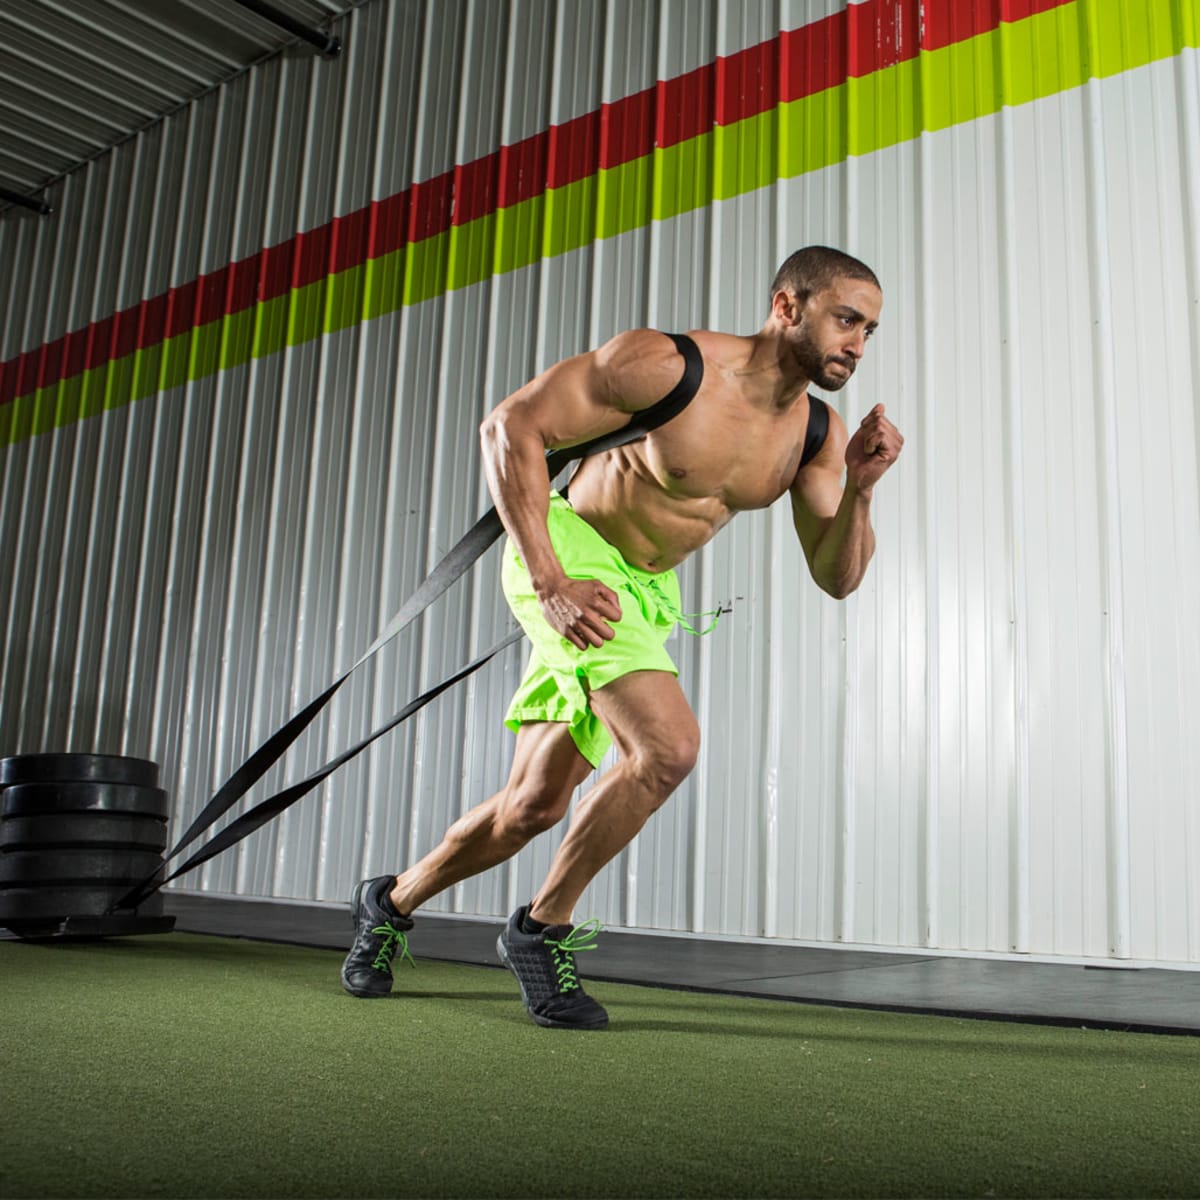 The Weight Sled Workout - Men's Journal